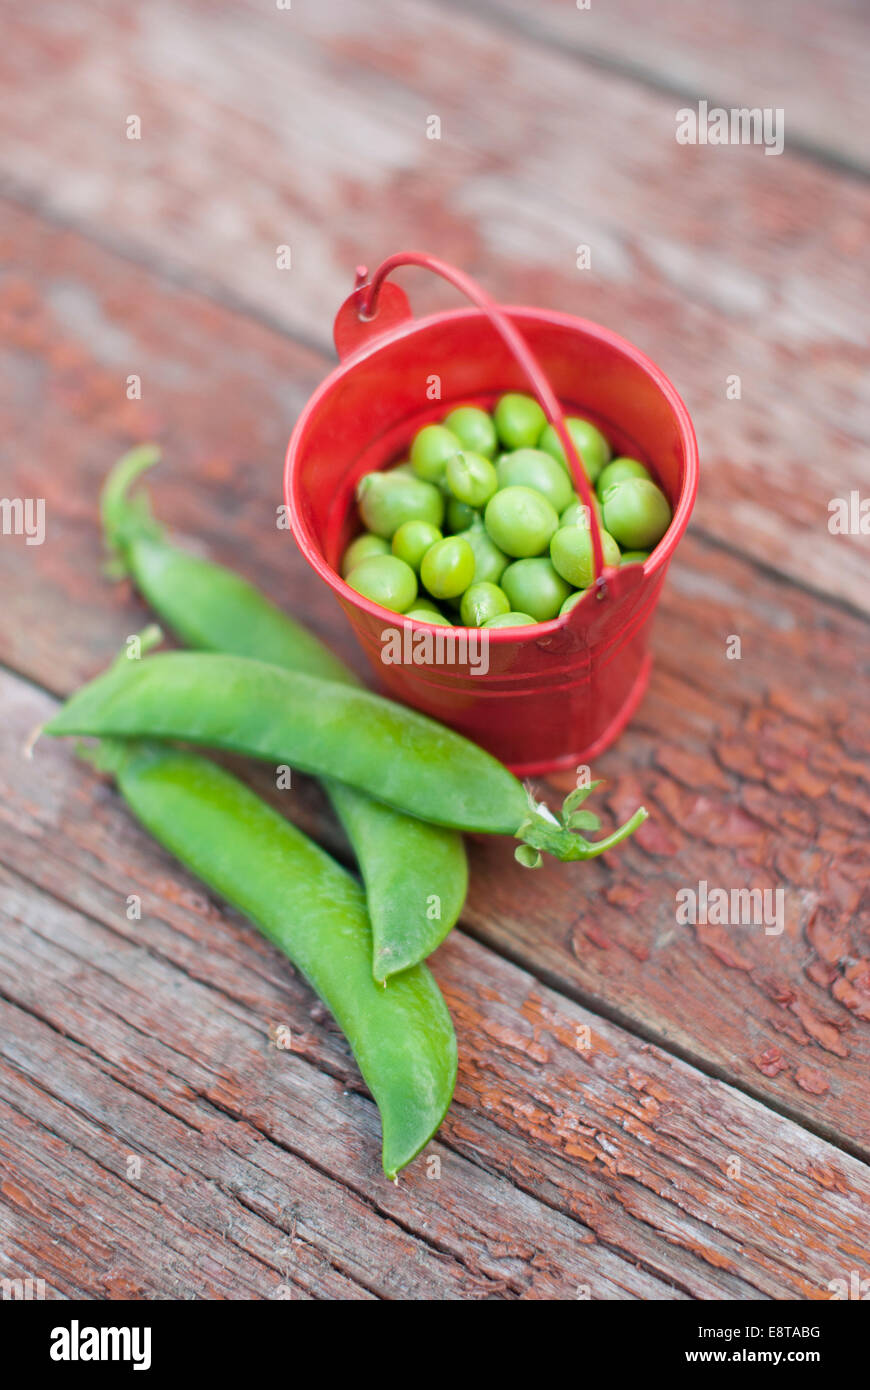 Peas in a bucket on a wooden background. Stock Photo